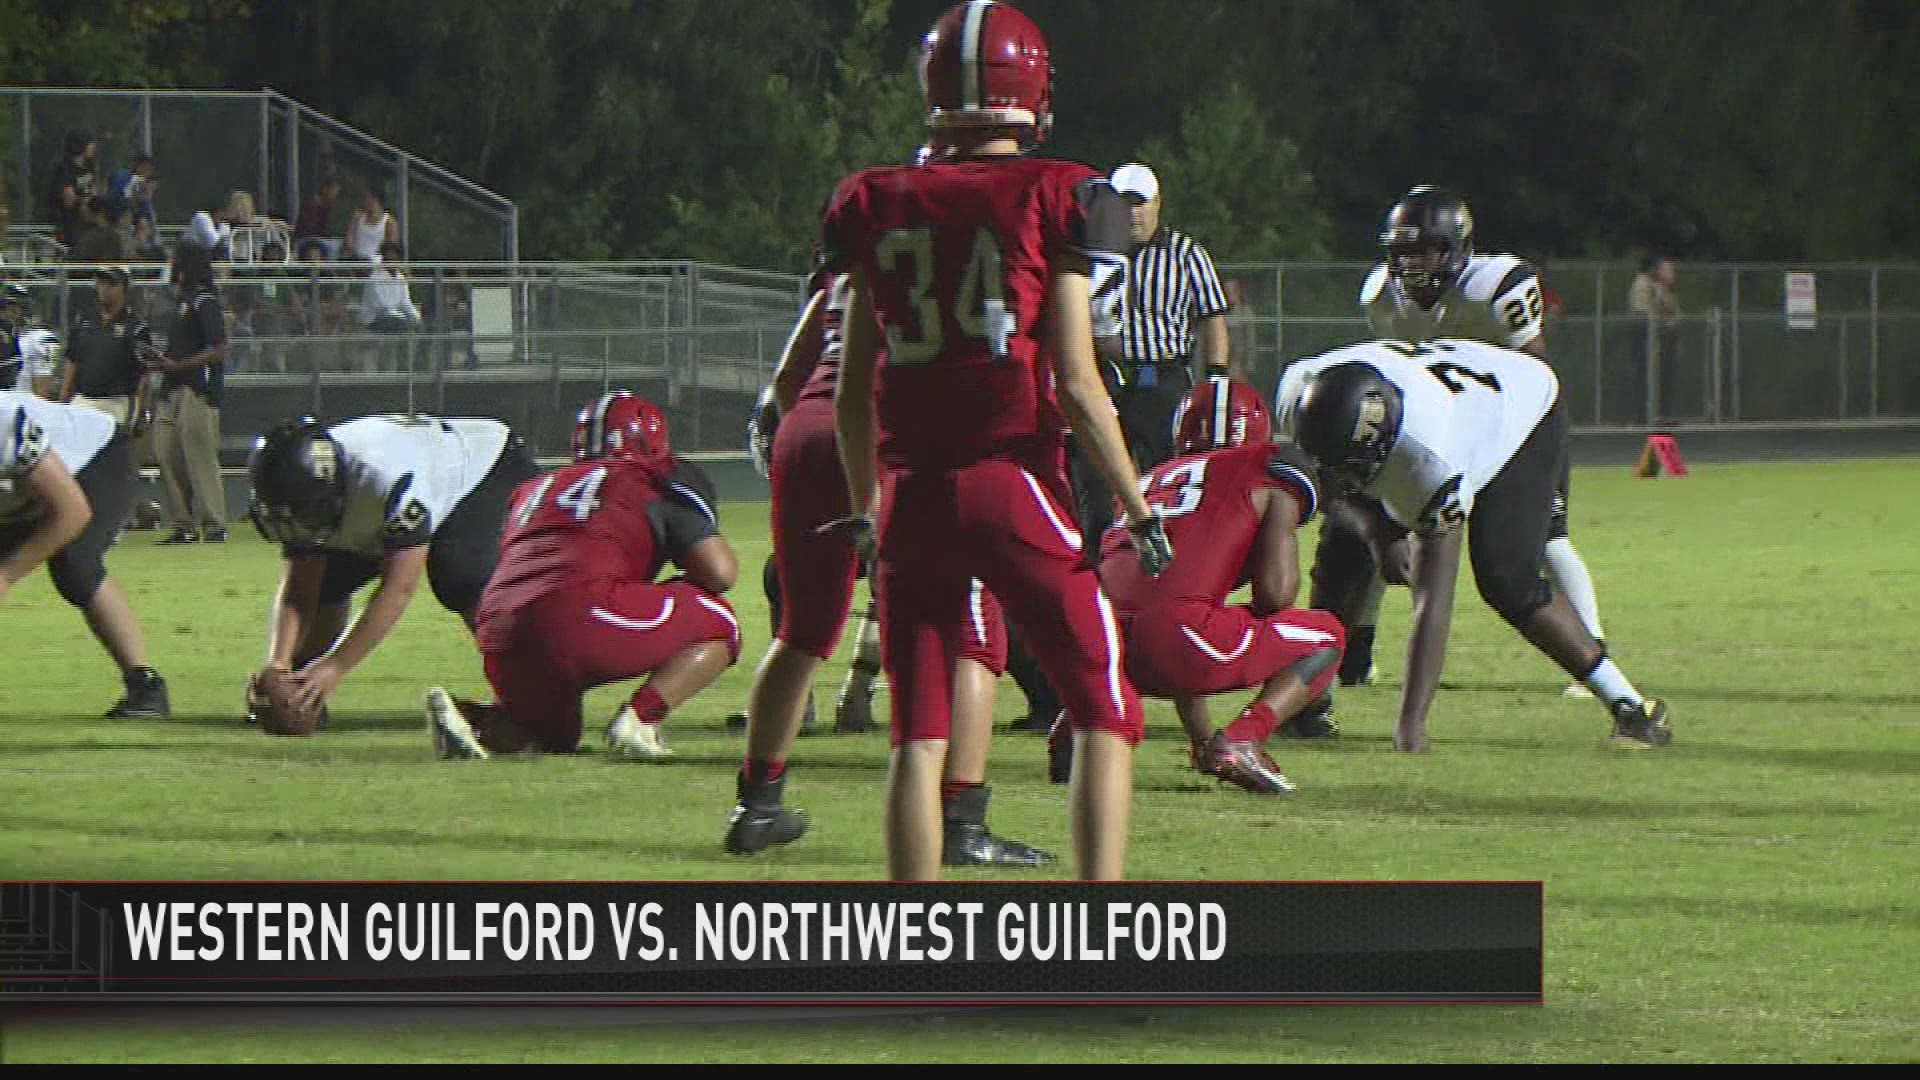 W. Guilford VS. NW Guilford